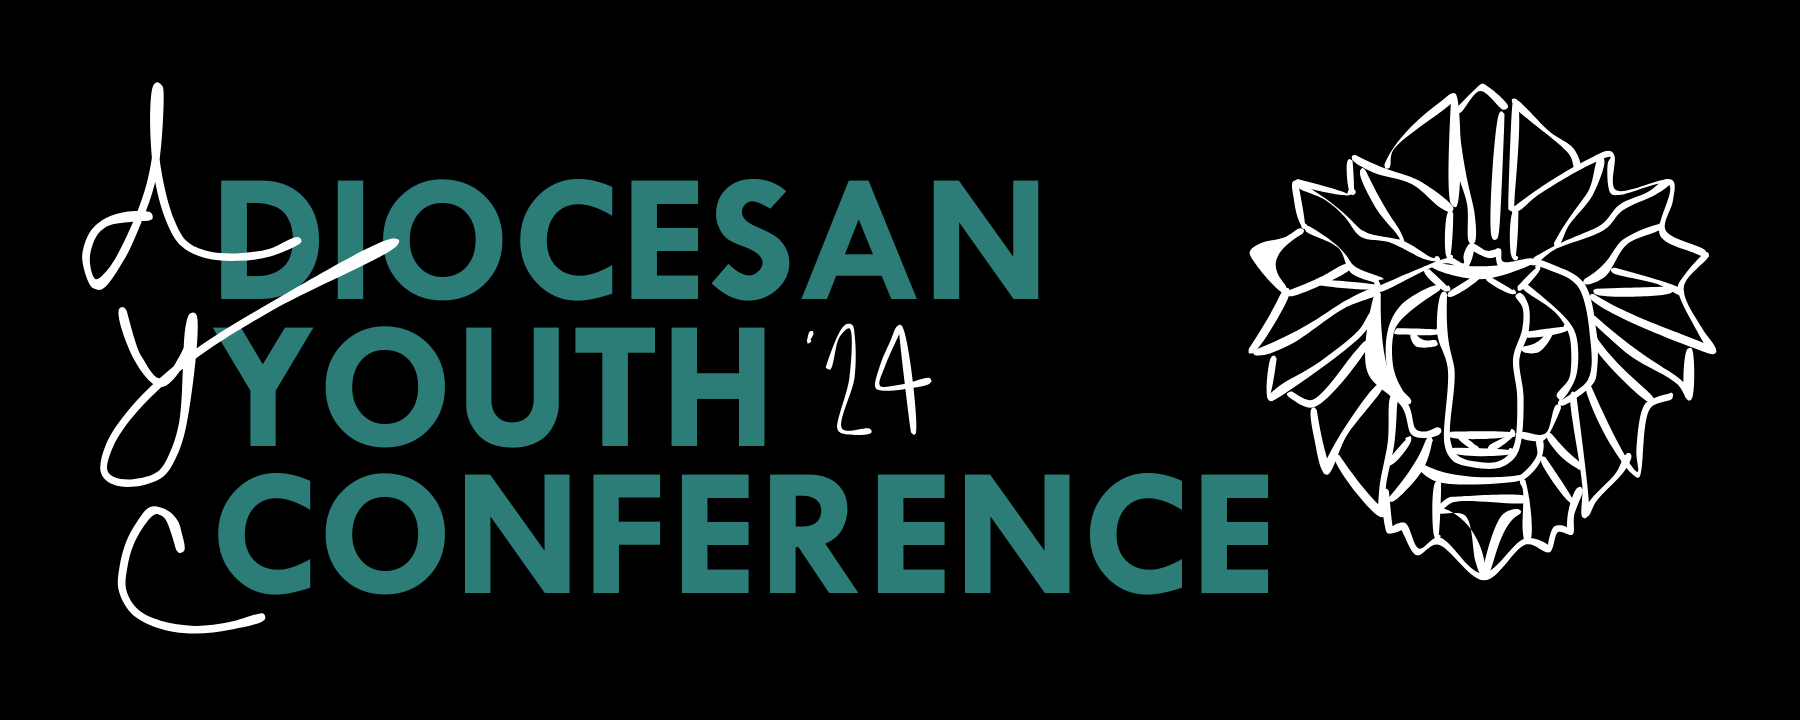 Diocesan Youth Conference